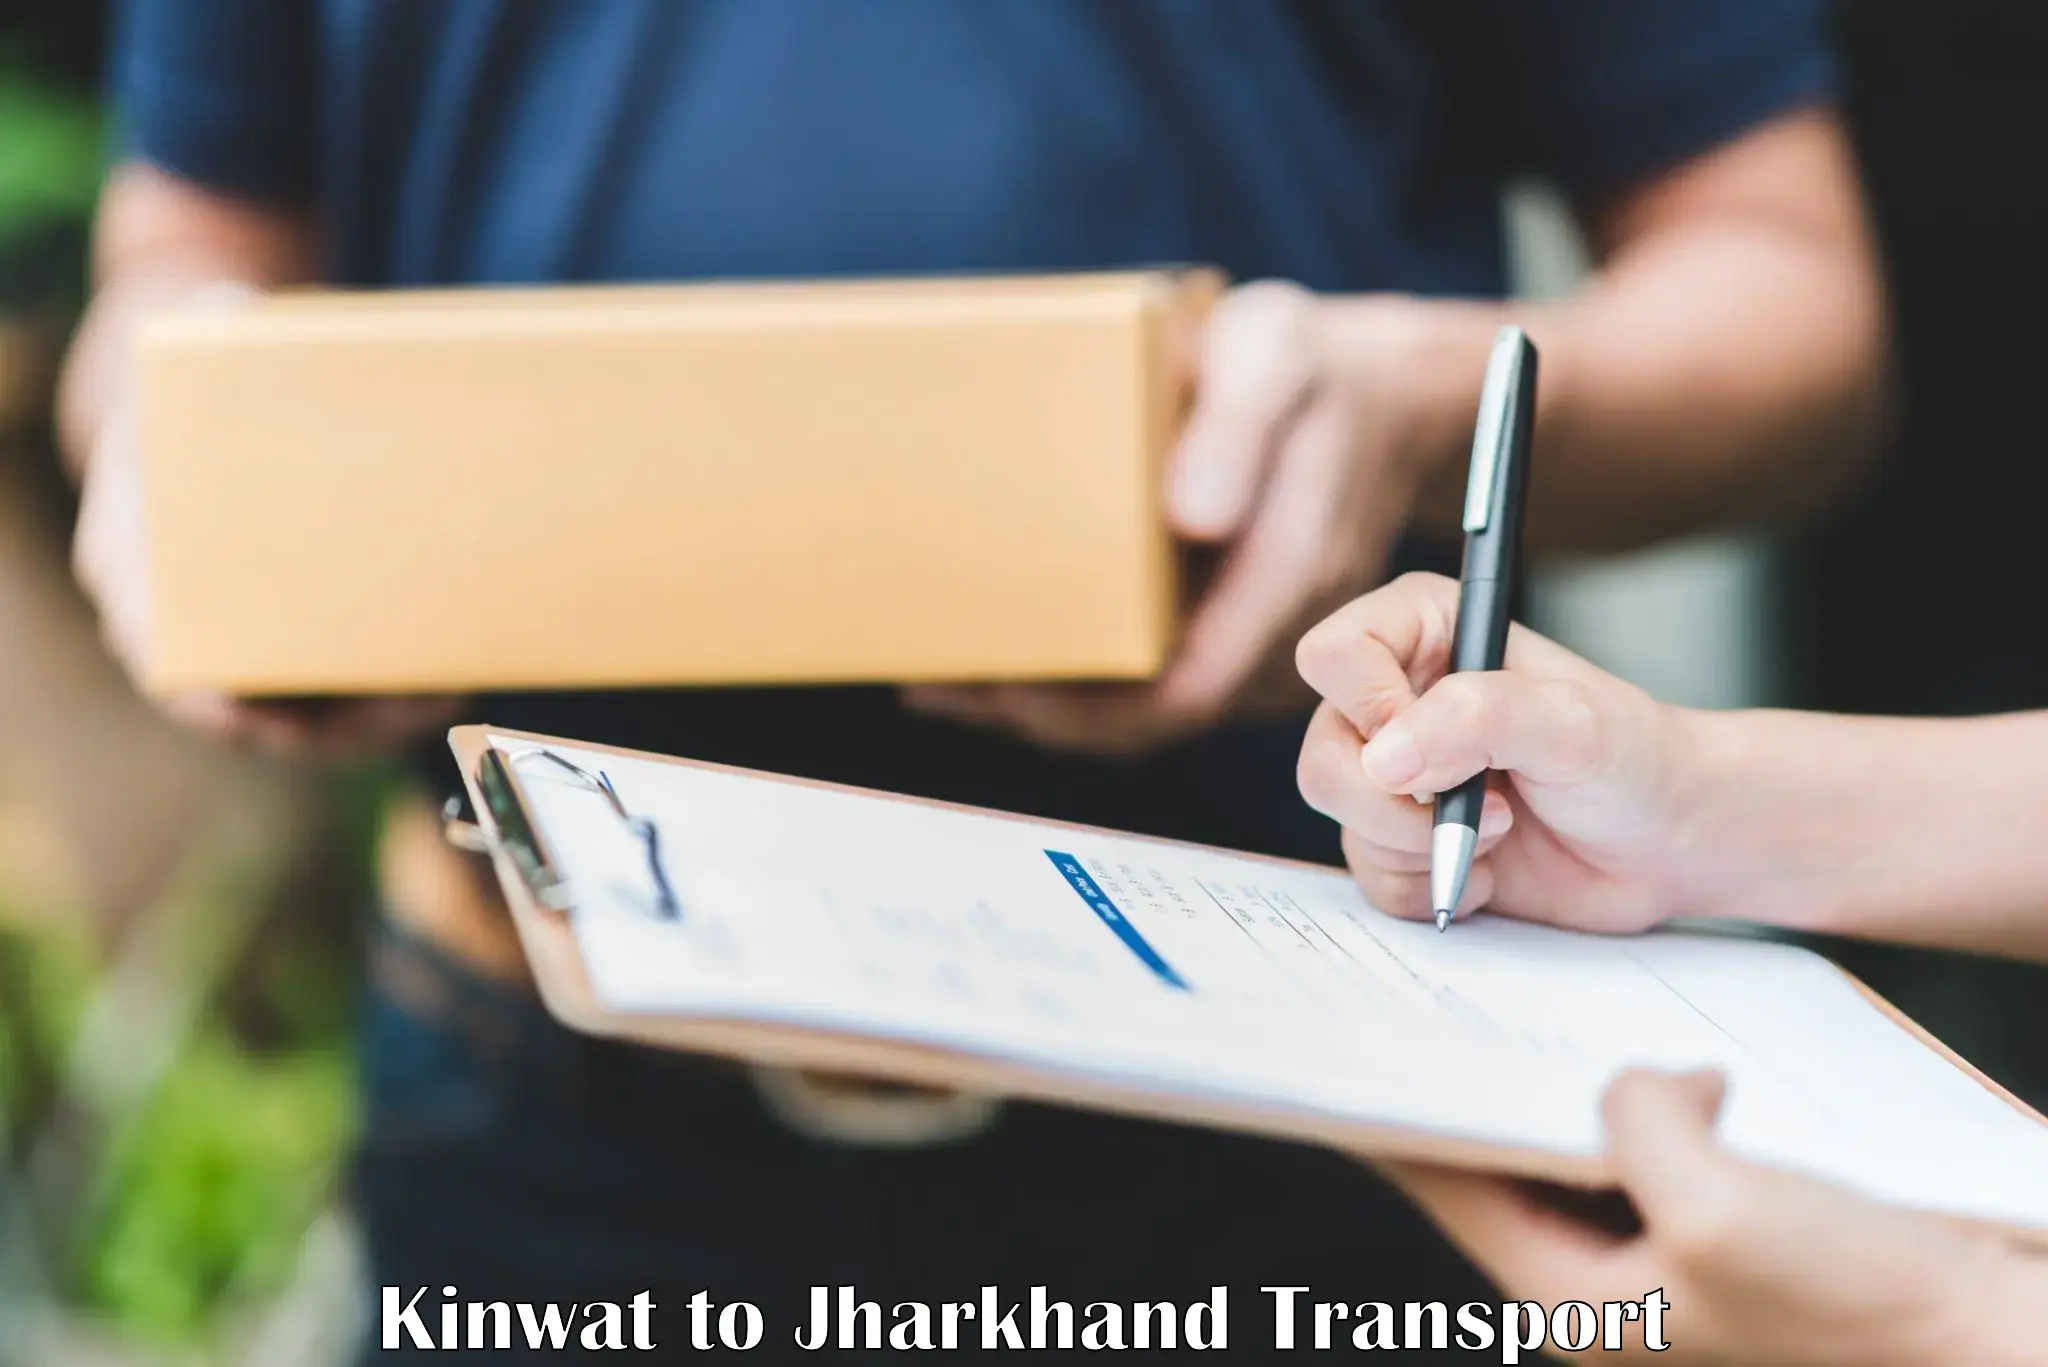 Truck transport companies in India Kinwat to Dhanbad